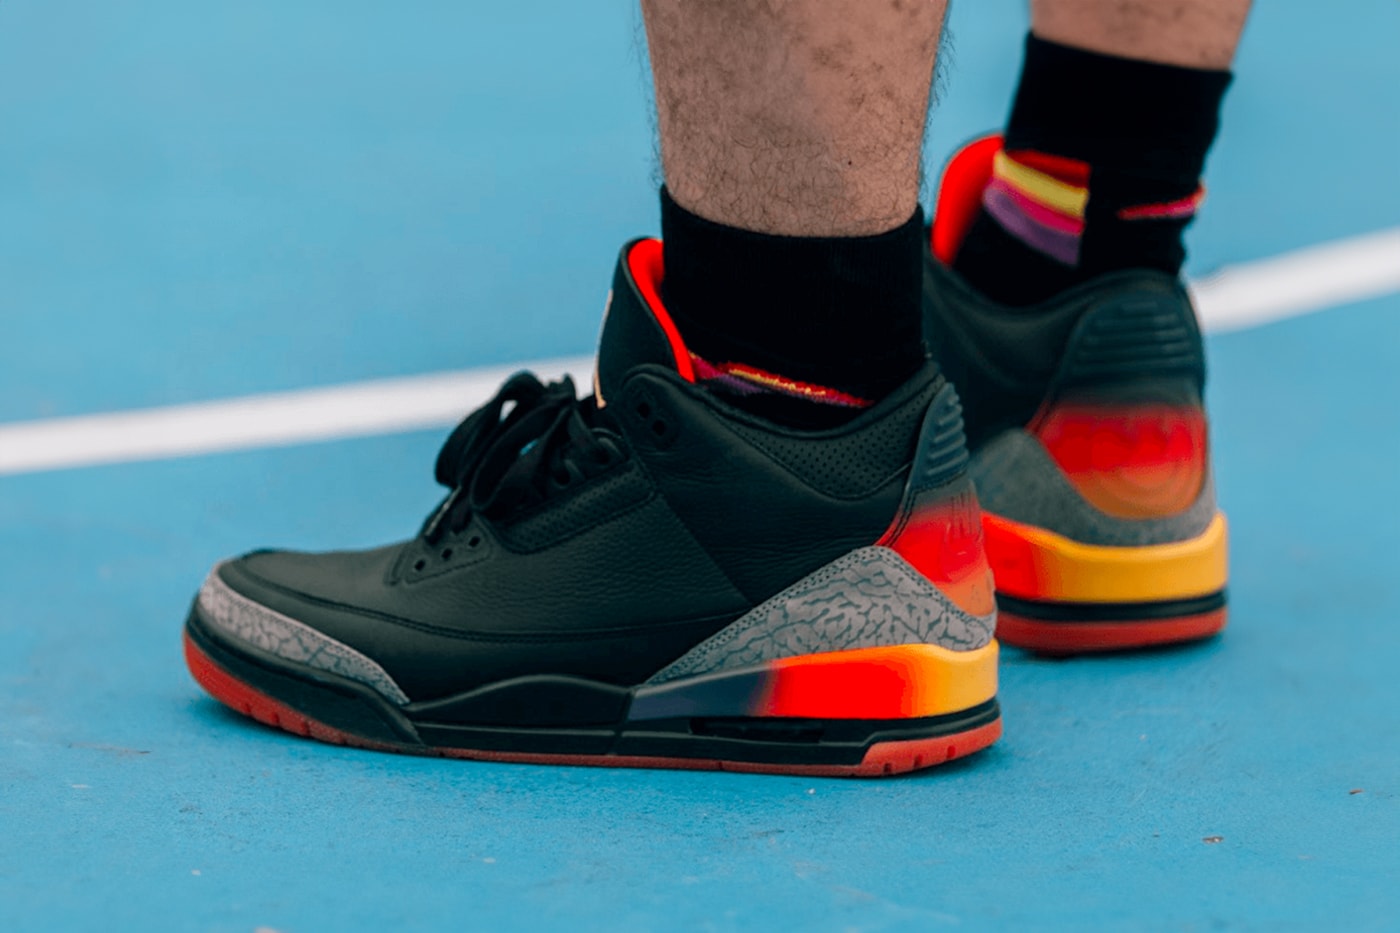 J.バルヴィンがジョーダン ブランドとの最新コラボ エアジョーダン 3 “リオ”をお披露目 First Look at the J Balvin x Air Jordan 3 "Rio" Black/Solar Flare-Total Crimson Abyss jimmy butler new york city basketball pickup game never before seen colorway jordan brand